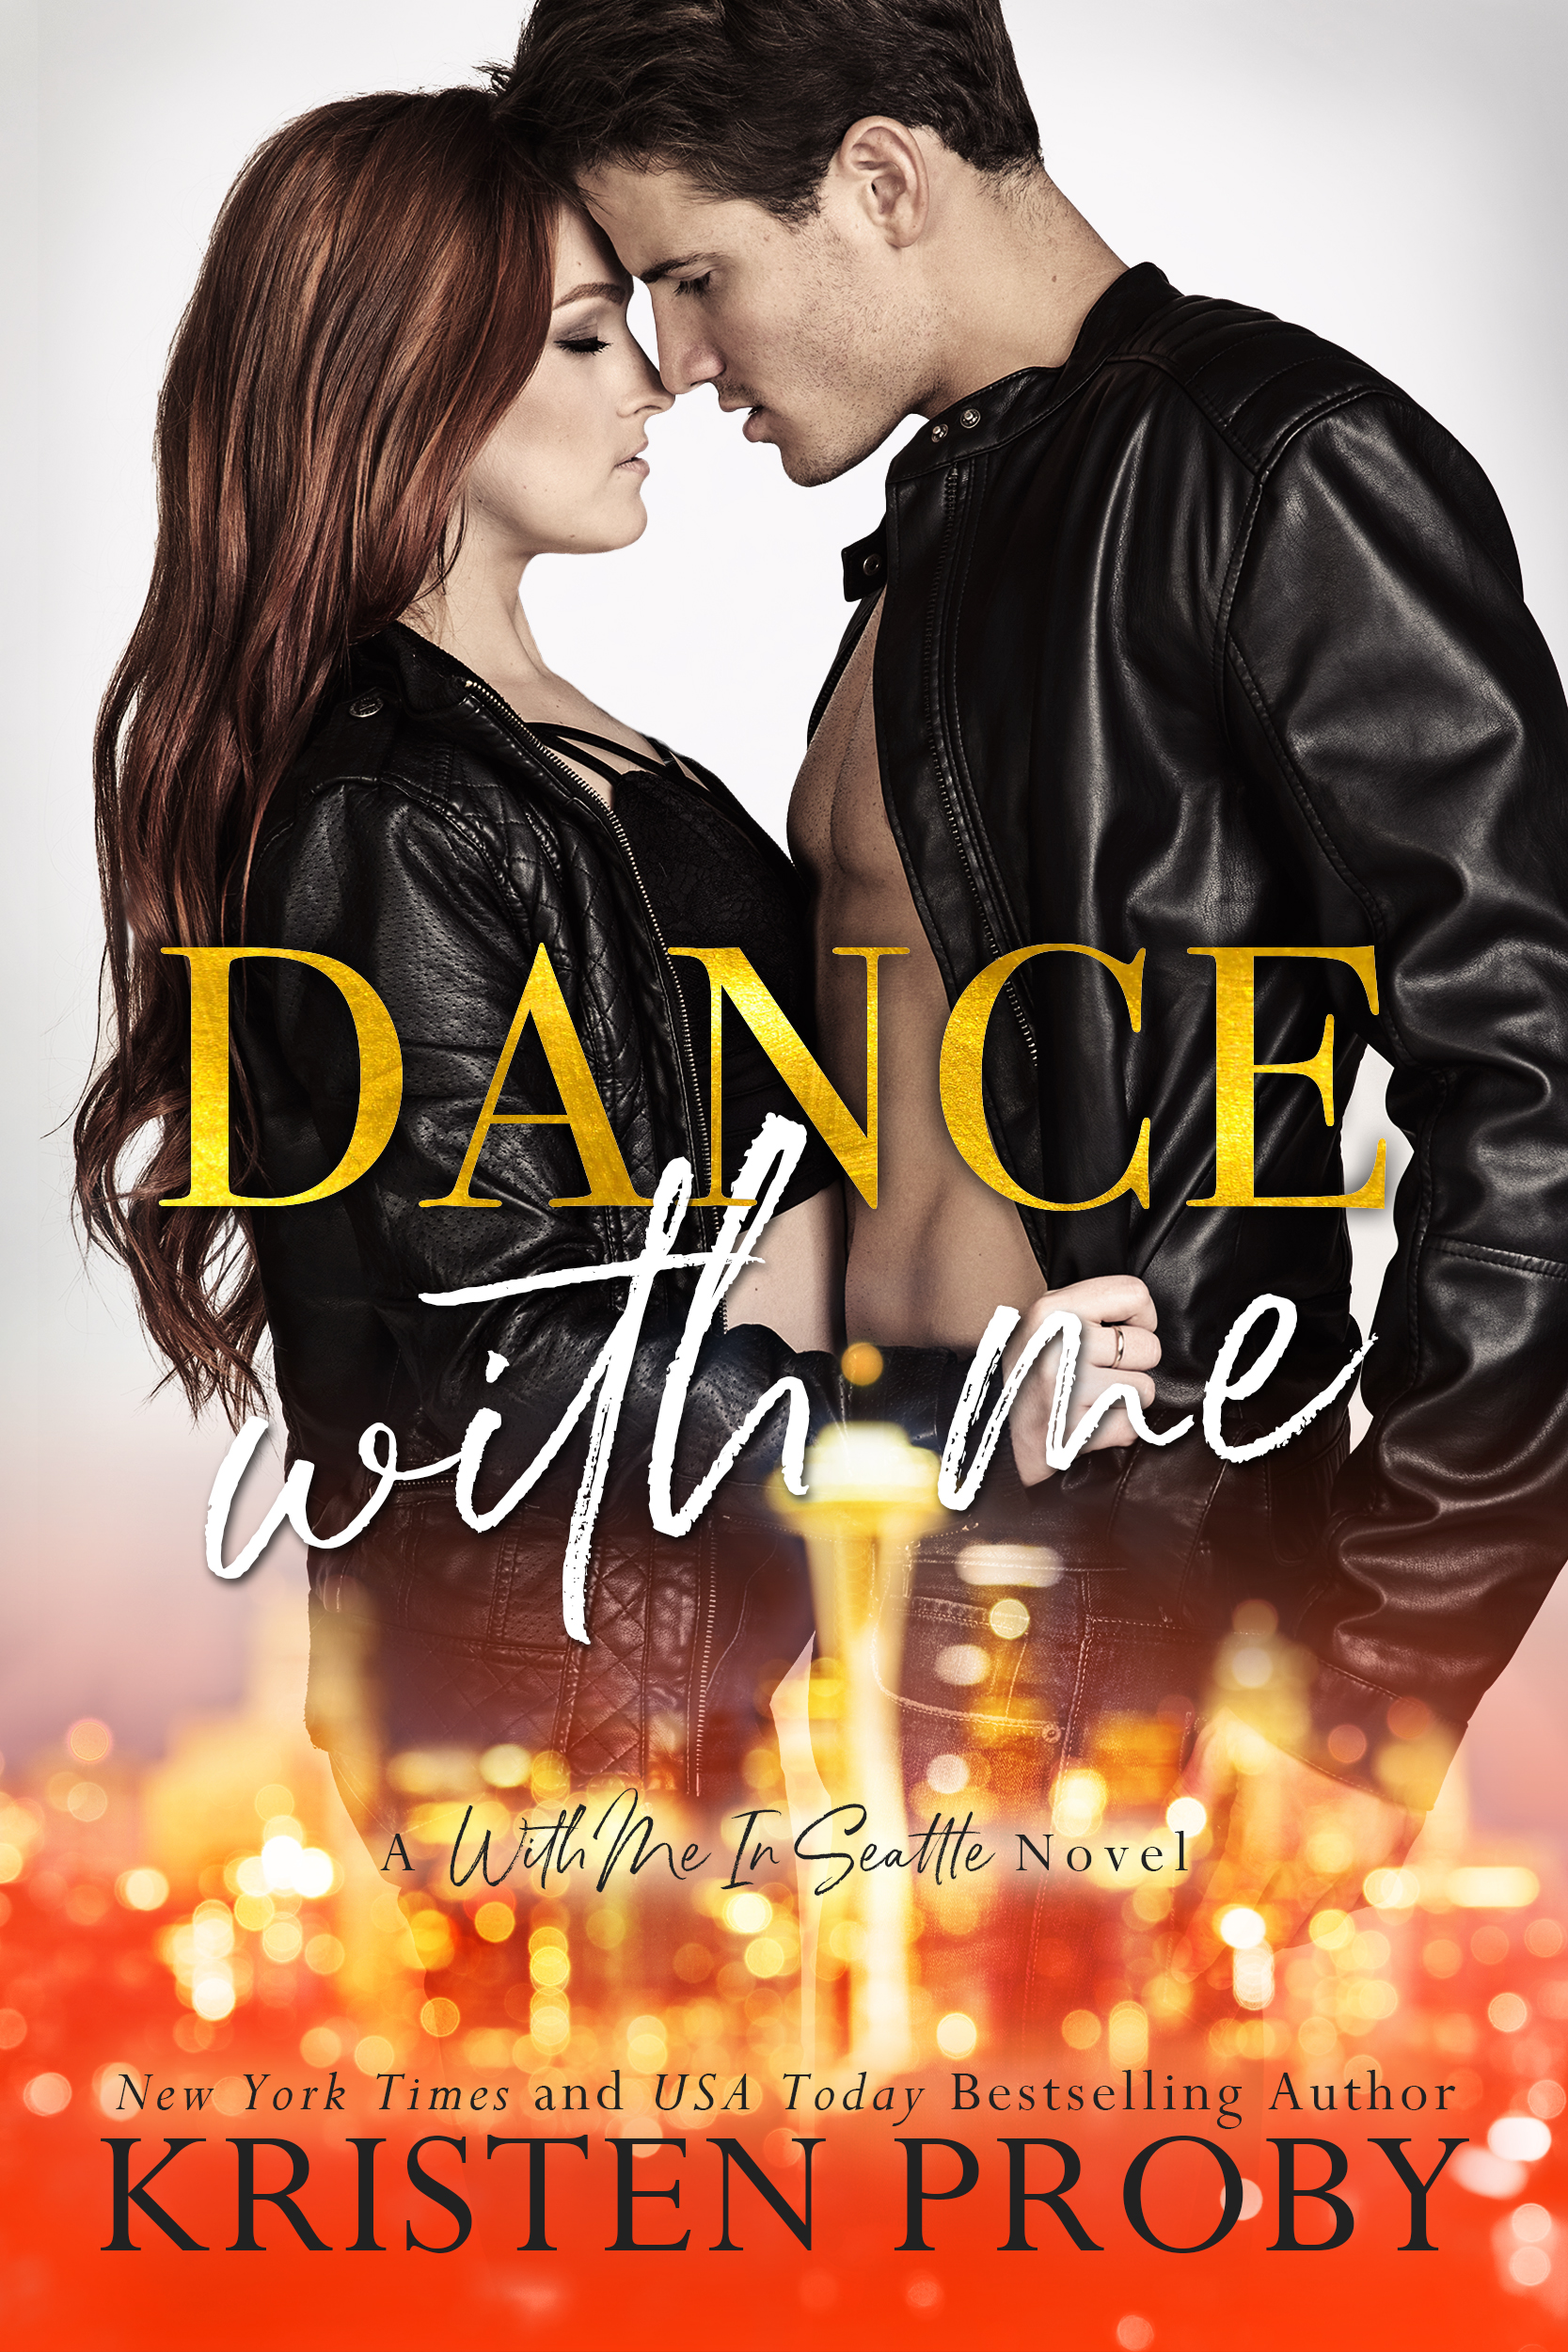 Dance With Me by #KristenProby [Blog Tour]